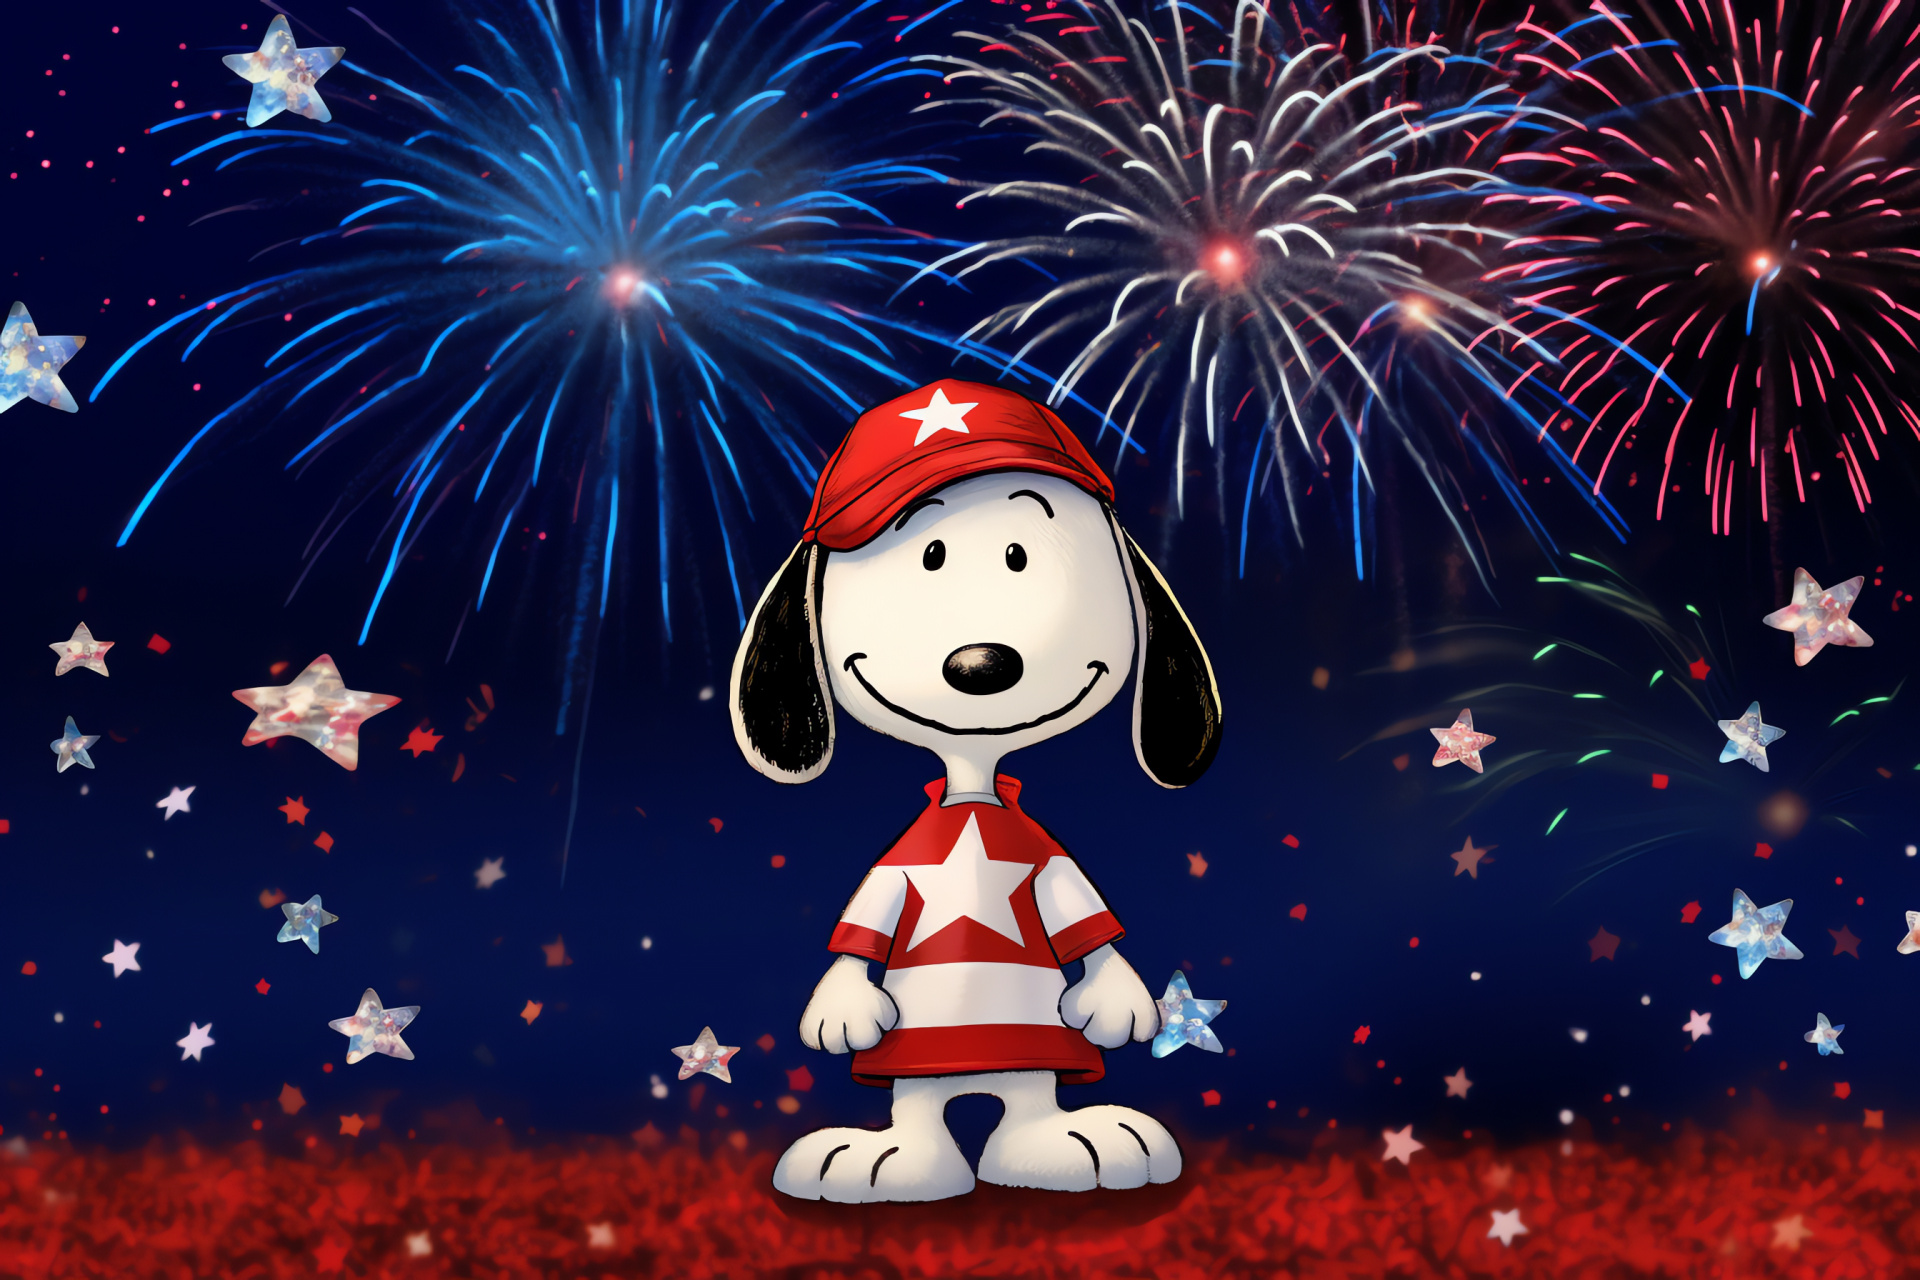 Animated special, National holiday, Pyrotechnics display, Patriotic theme, Beagle character, HD Desktop Image